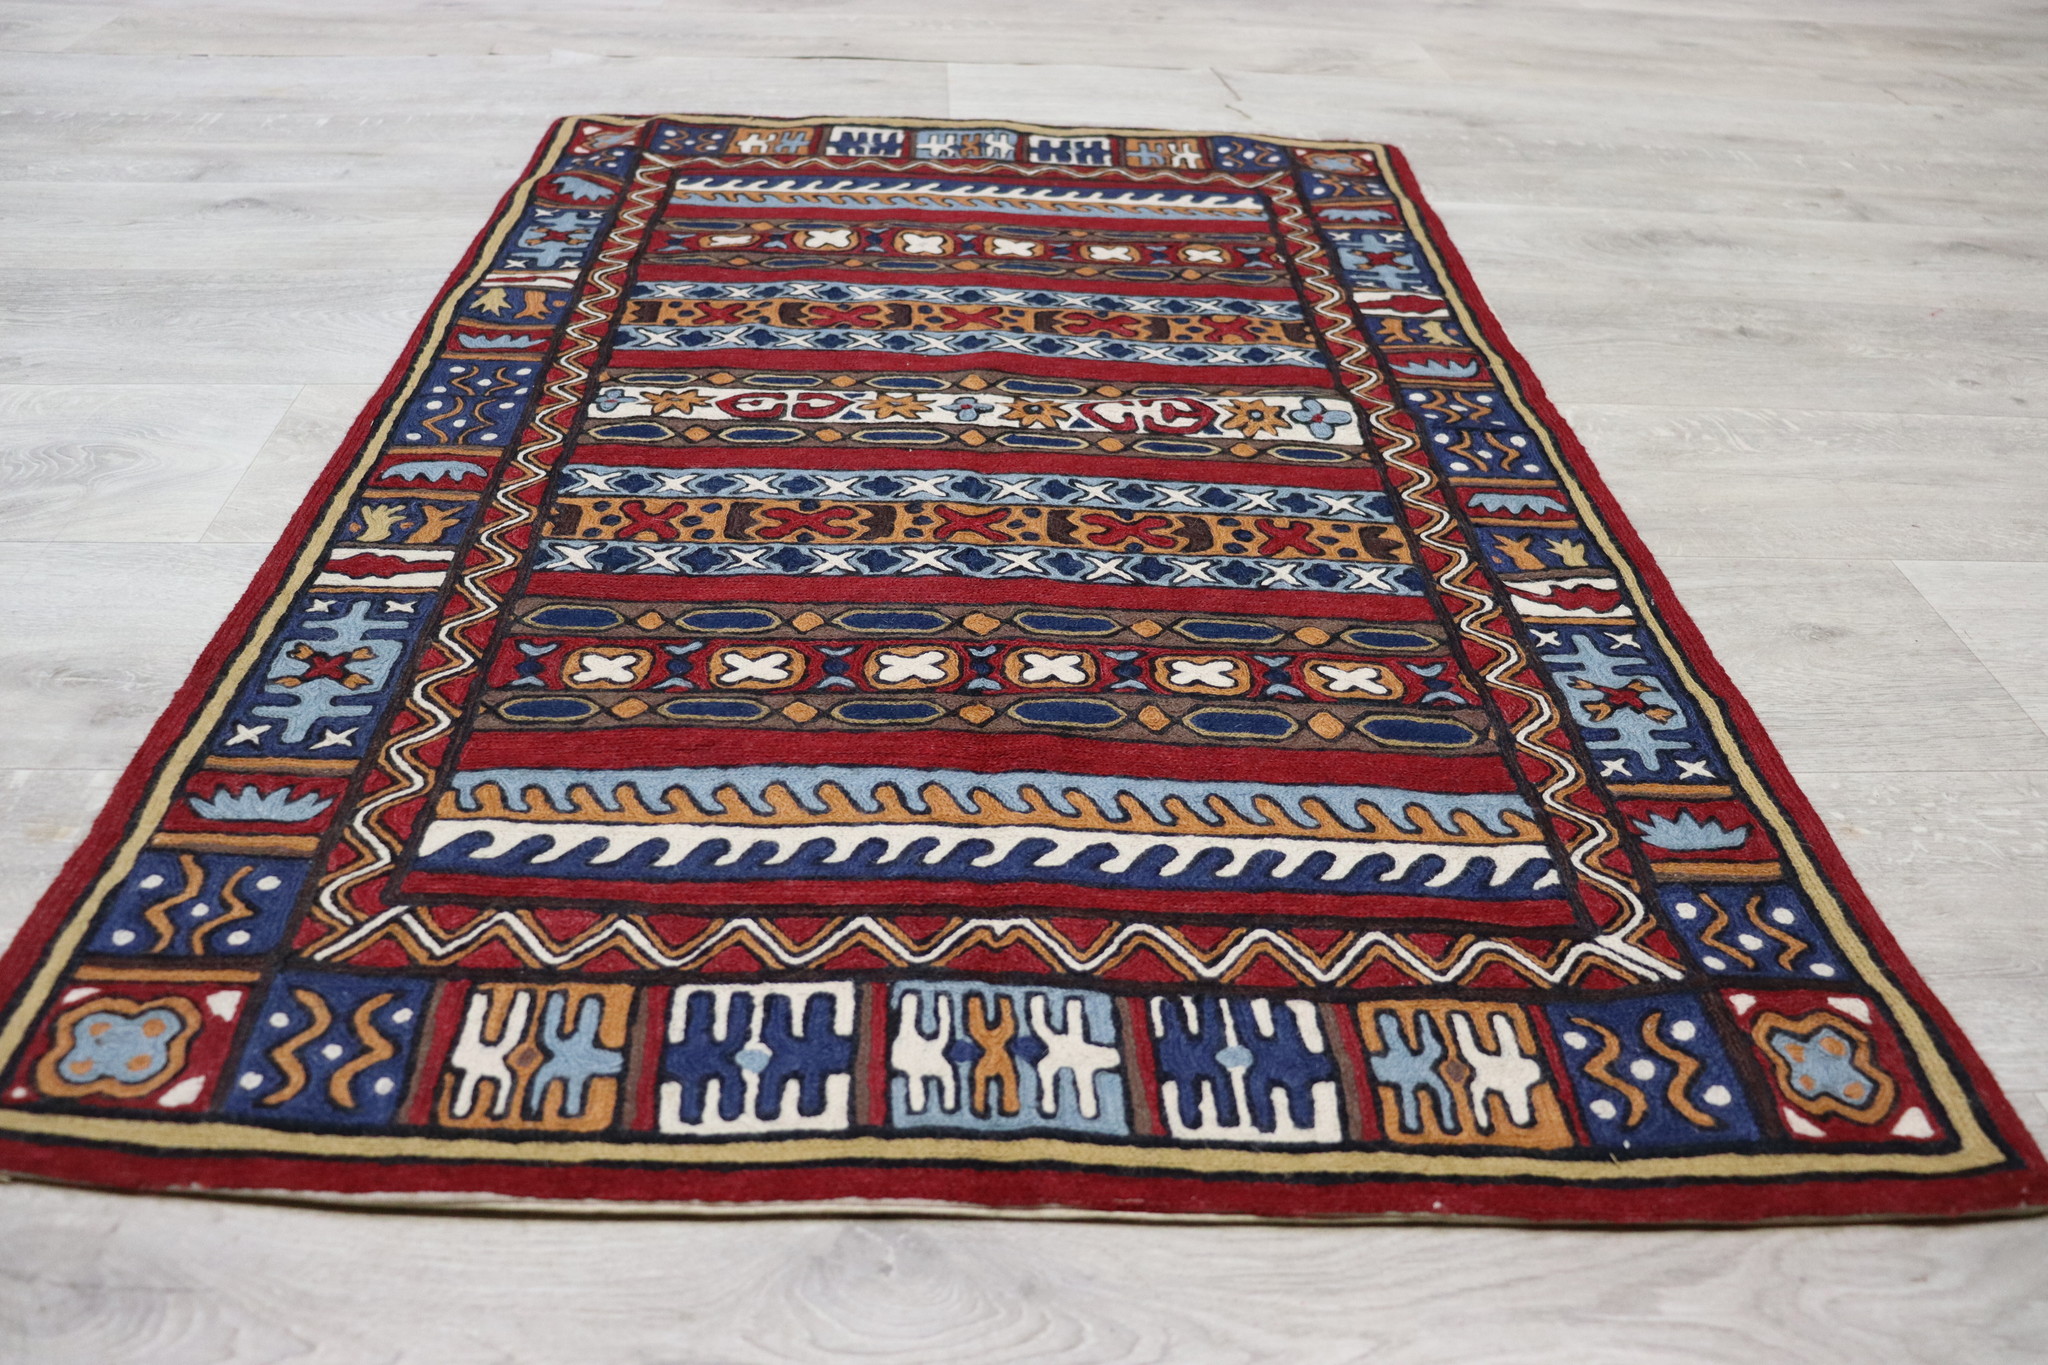 120x77 cm  suzani hand embroidered wall hanging, bedspread, bed coverlet from Kashmir india. - 22/6